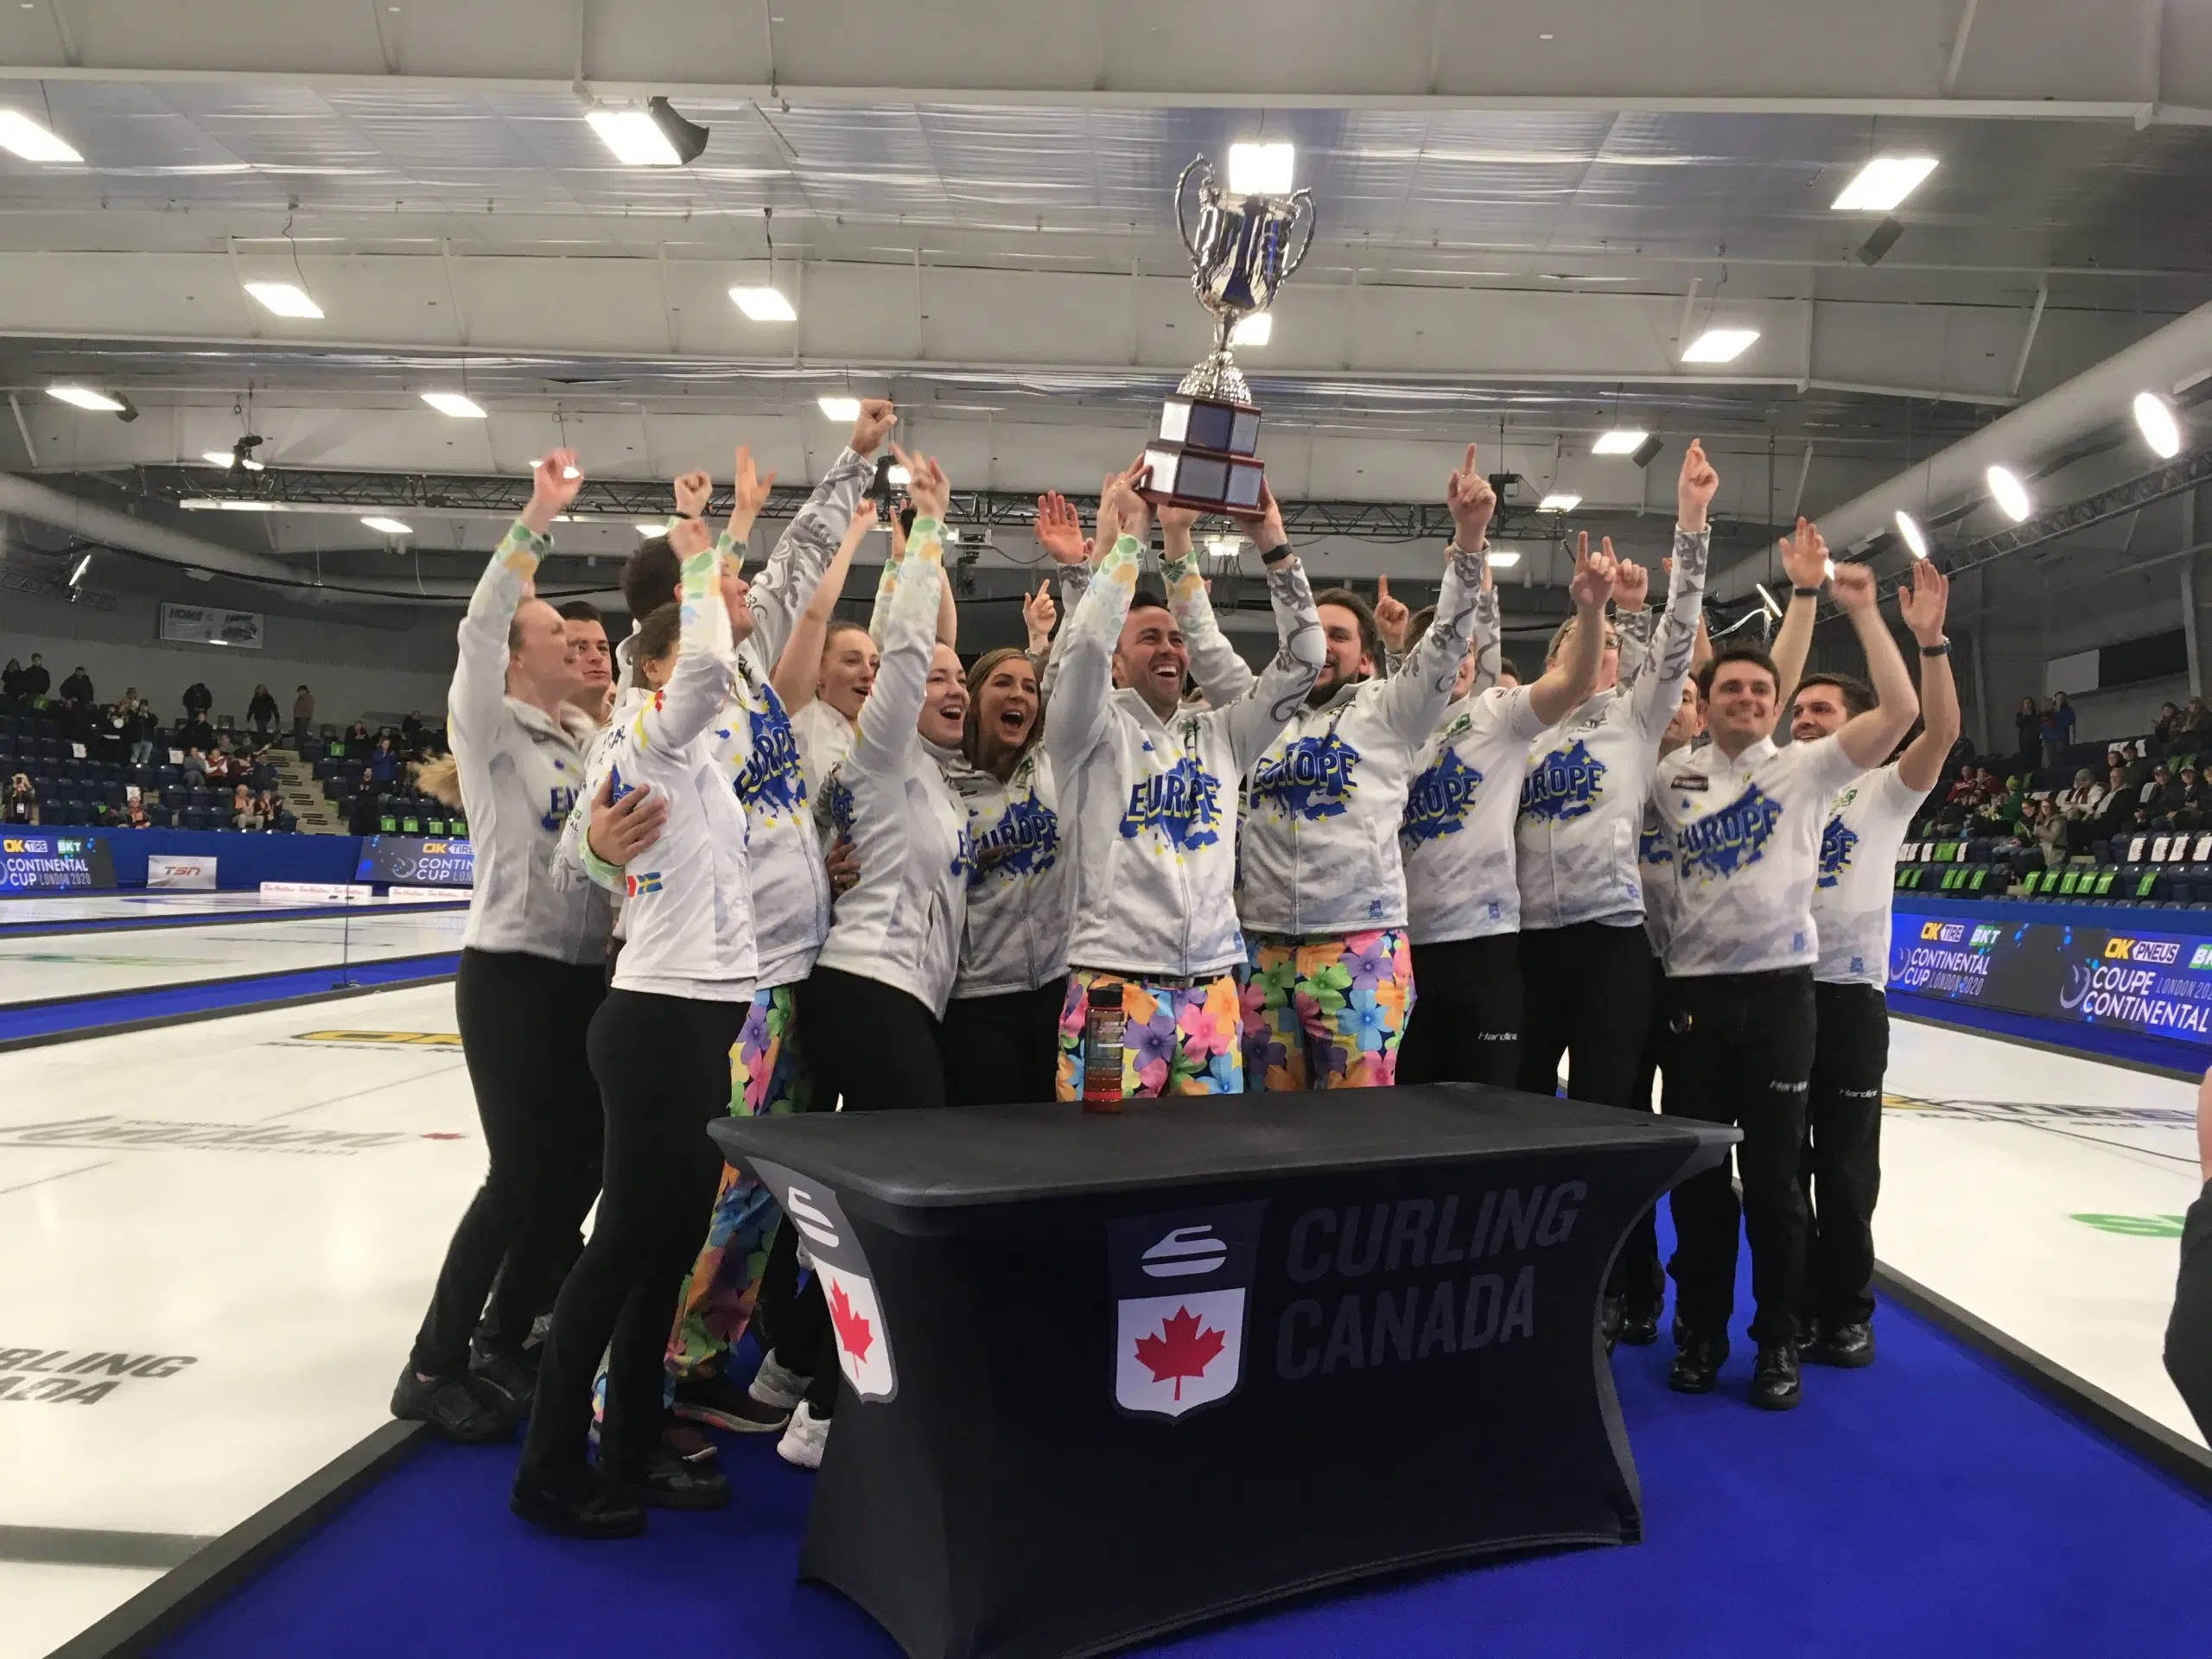 Europe wins the 2020 Continental Cup of Curling. CFRL